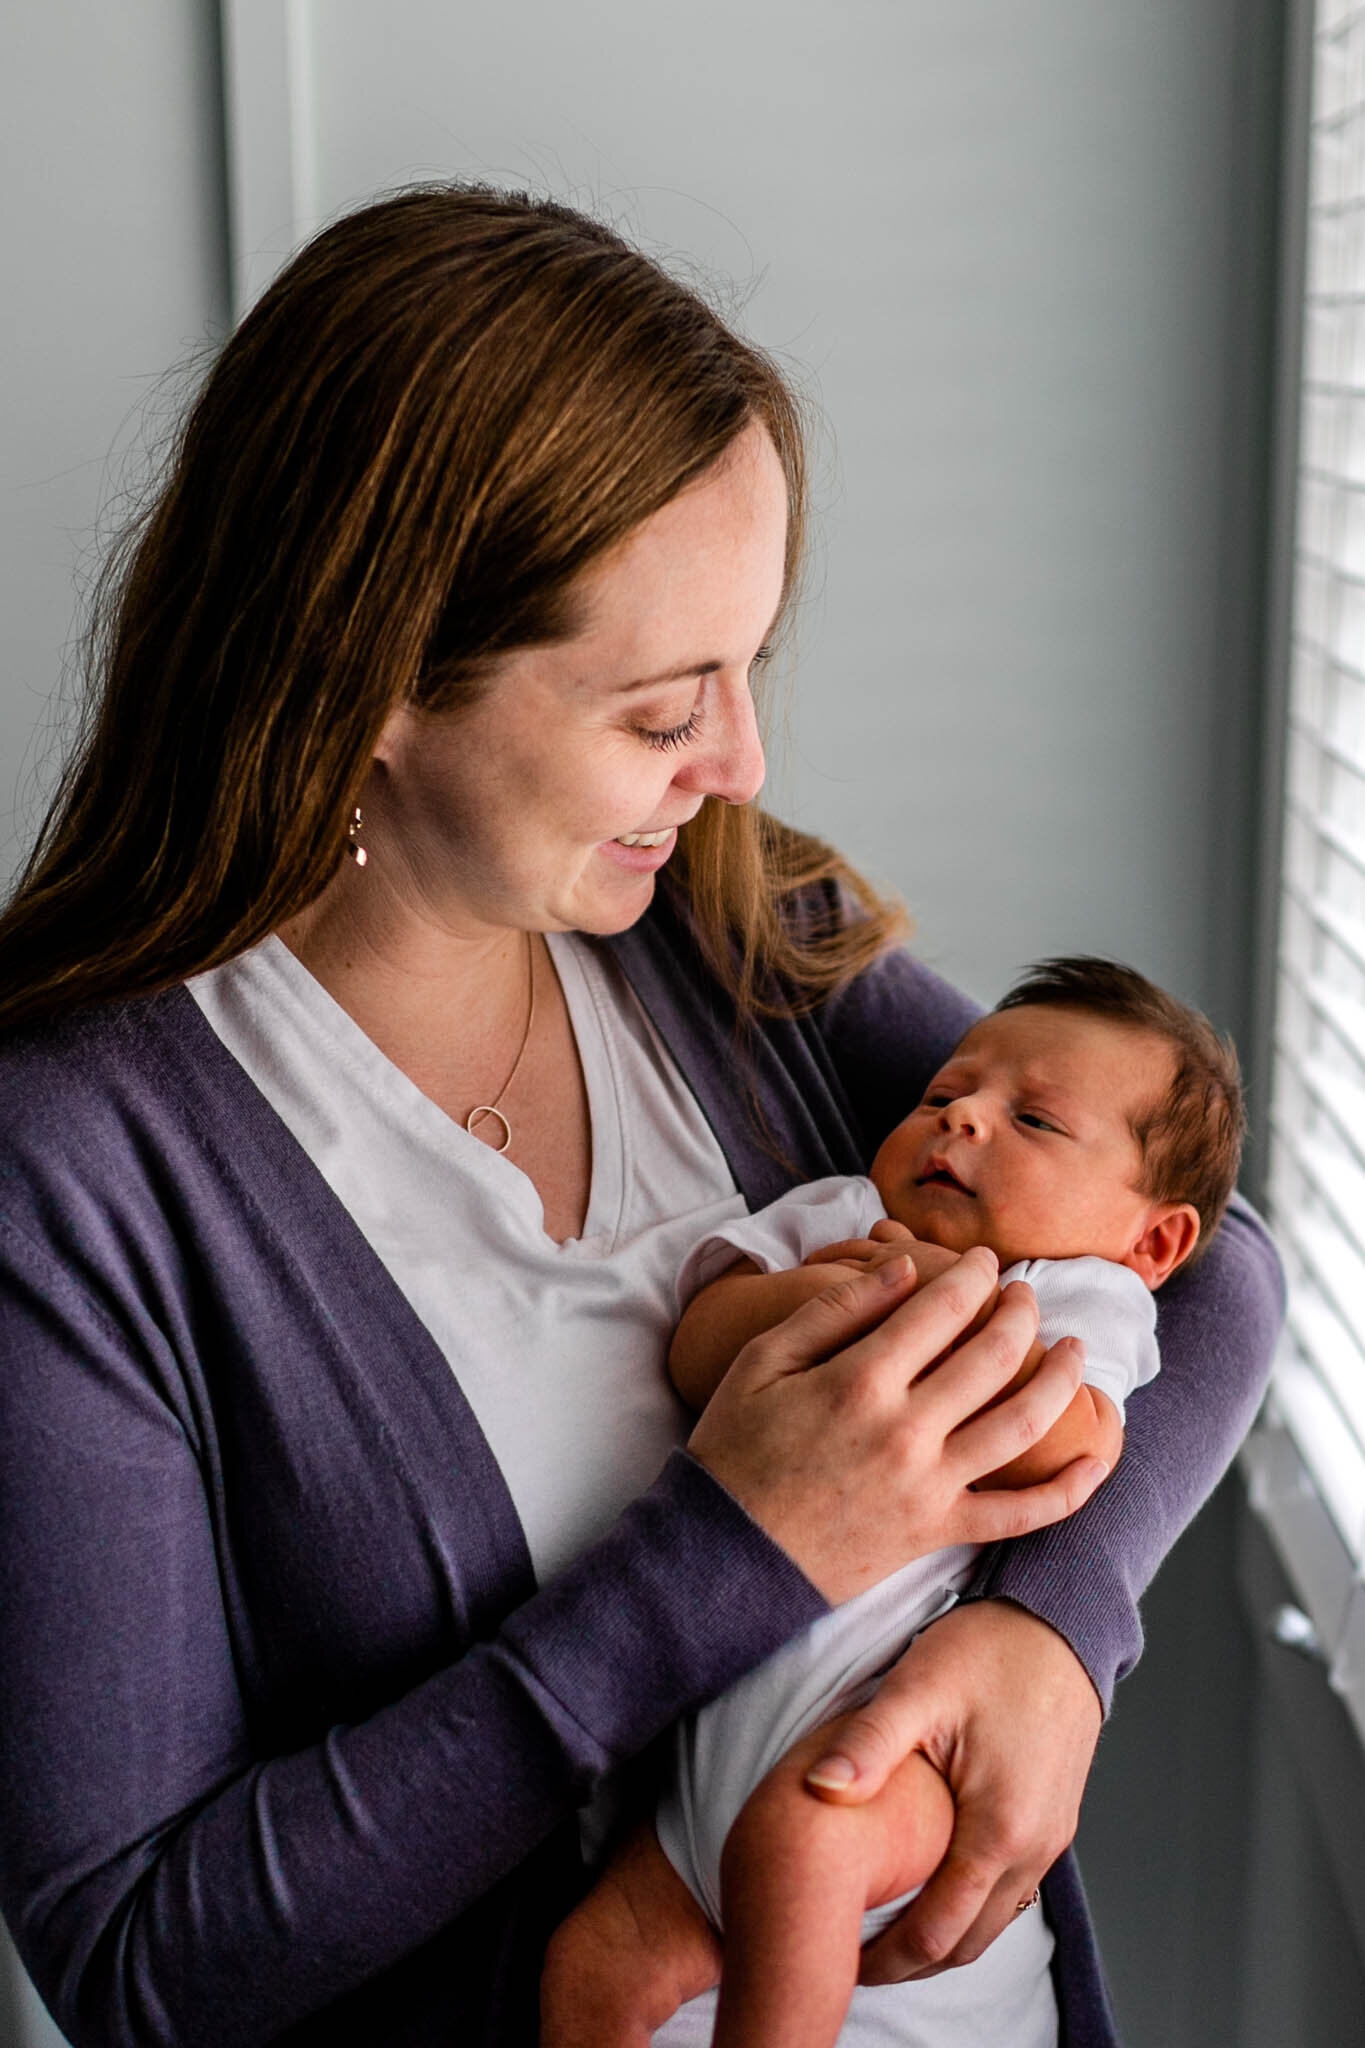 Durham Newborn Photographer | By G. Lin Photography | Mother holding baby by window and smiling